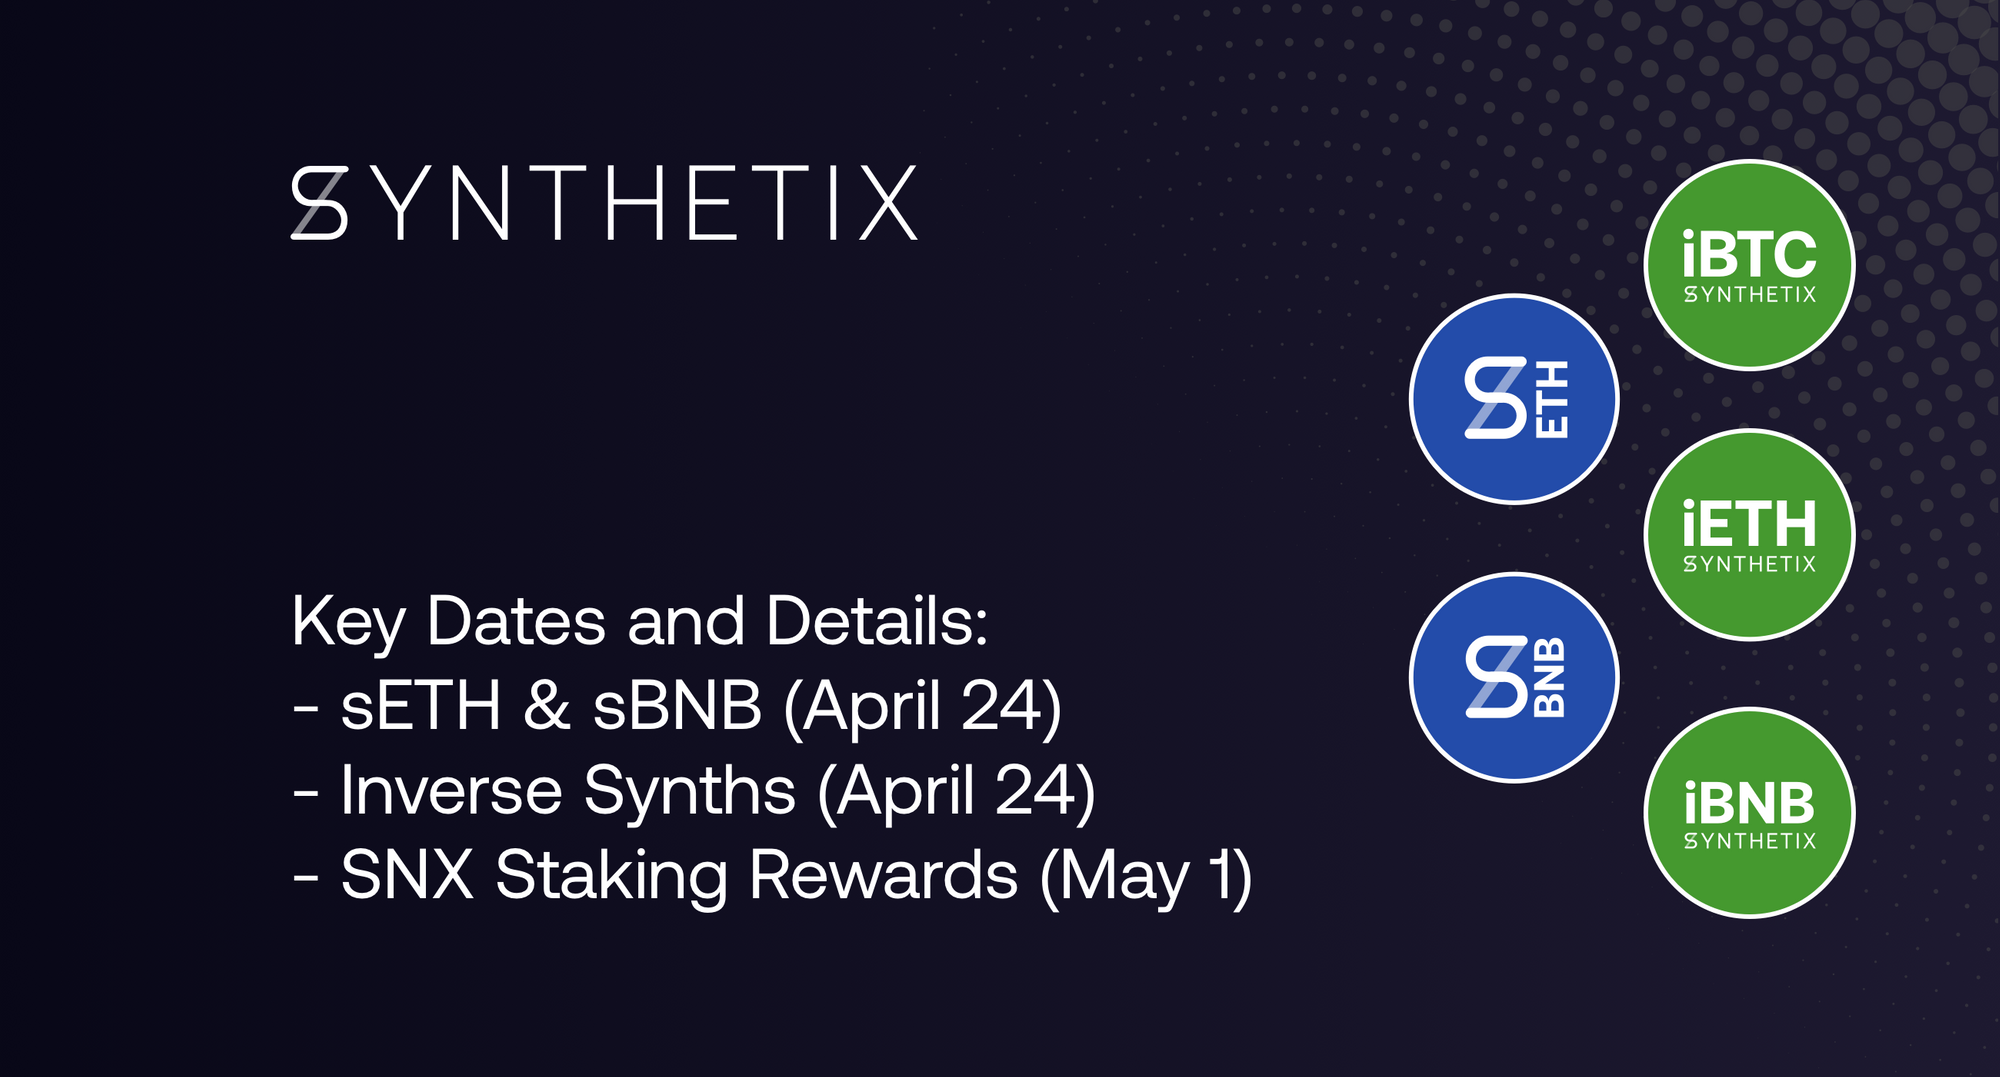 Key Dates and Details: sETH, sBNB, Inverse Synths, and SNX Staking Rewards